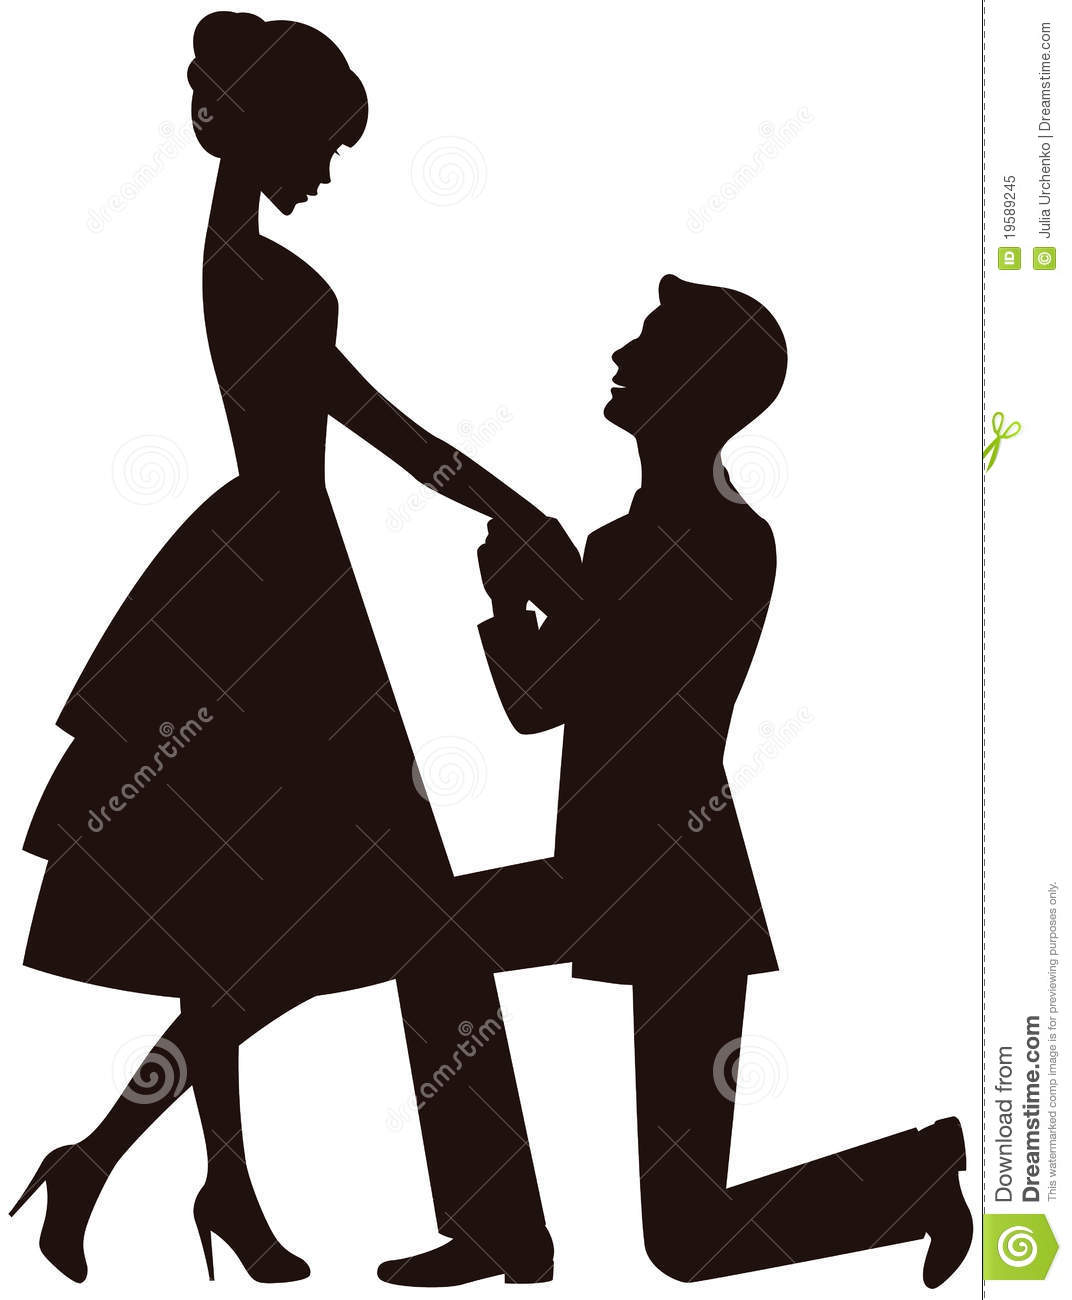 Marriage Proposal Royalty Free Stock Photo   Image  19589245